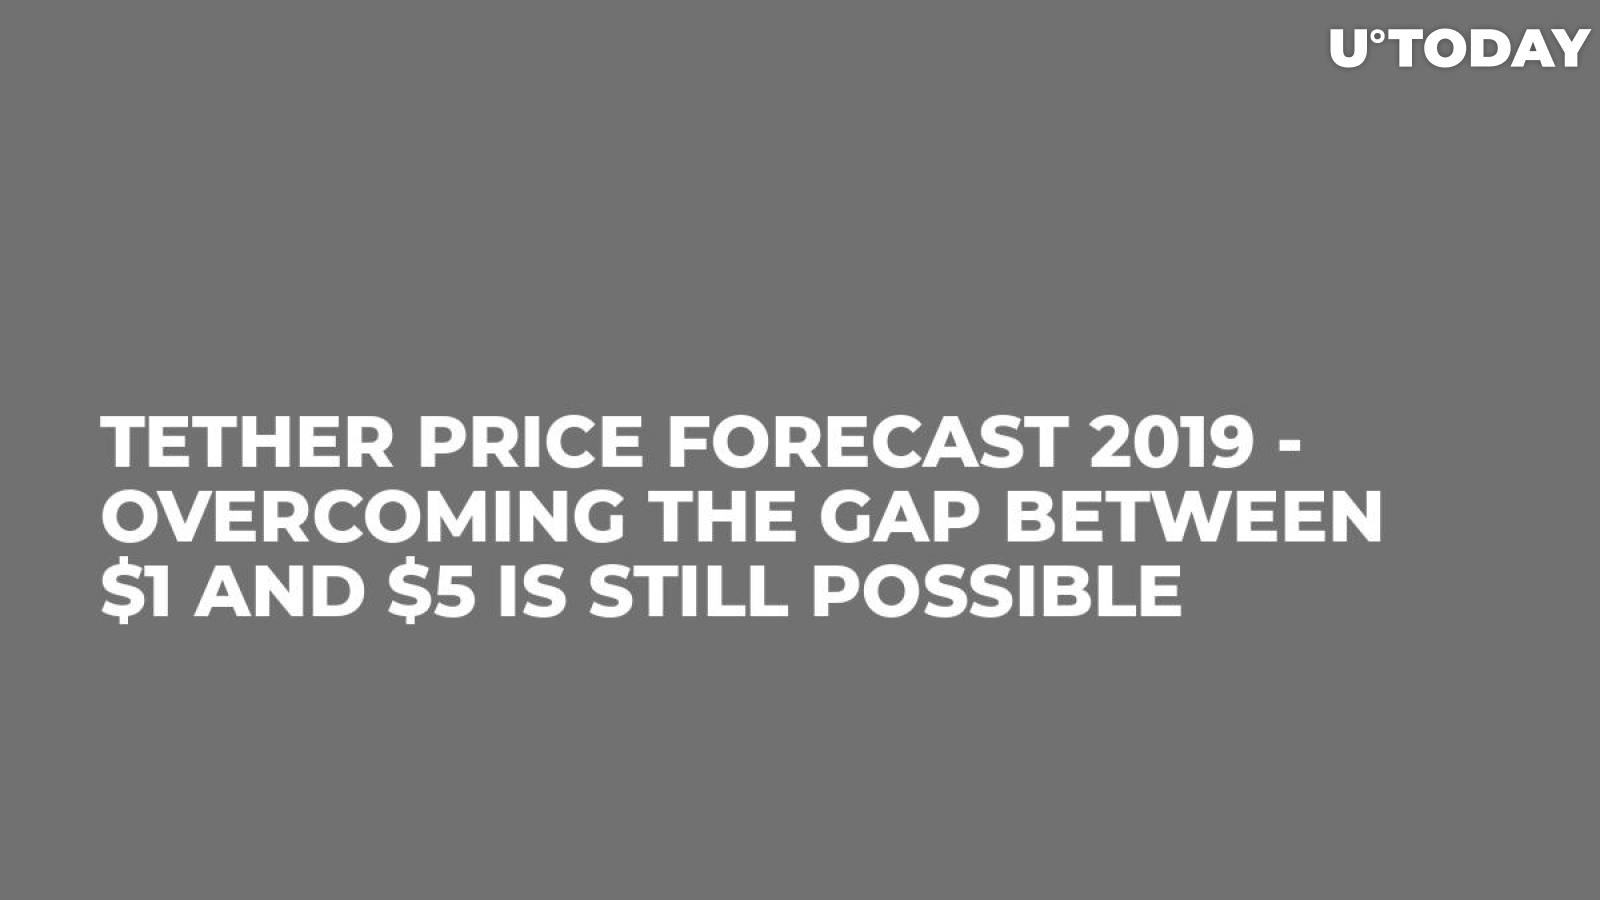 Tether Price Forecast 2019 - Overcoming the Gap Between $1 and $5 Is Still Possible